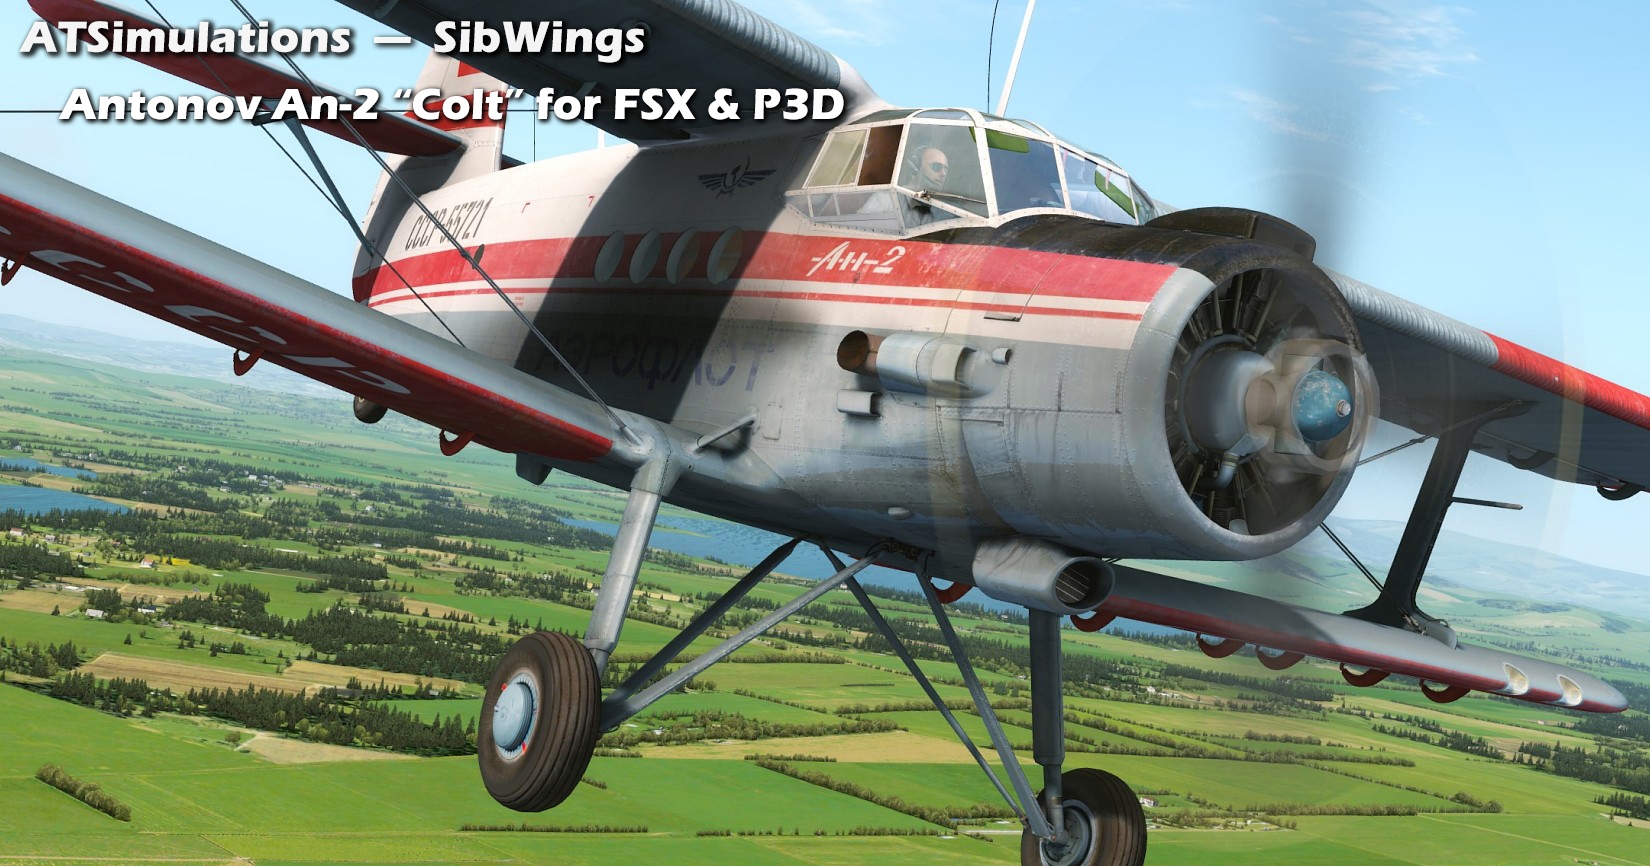 The ATSimulations An-2 has been released for FSX and Prepar3D